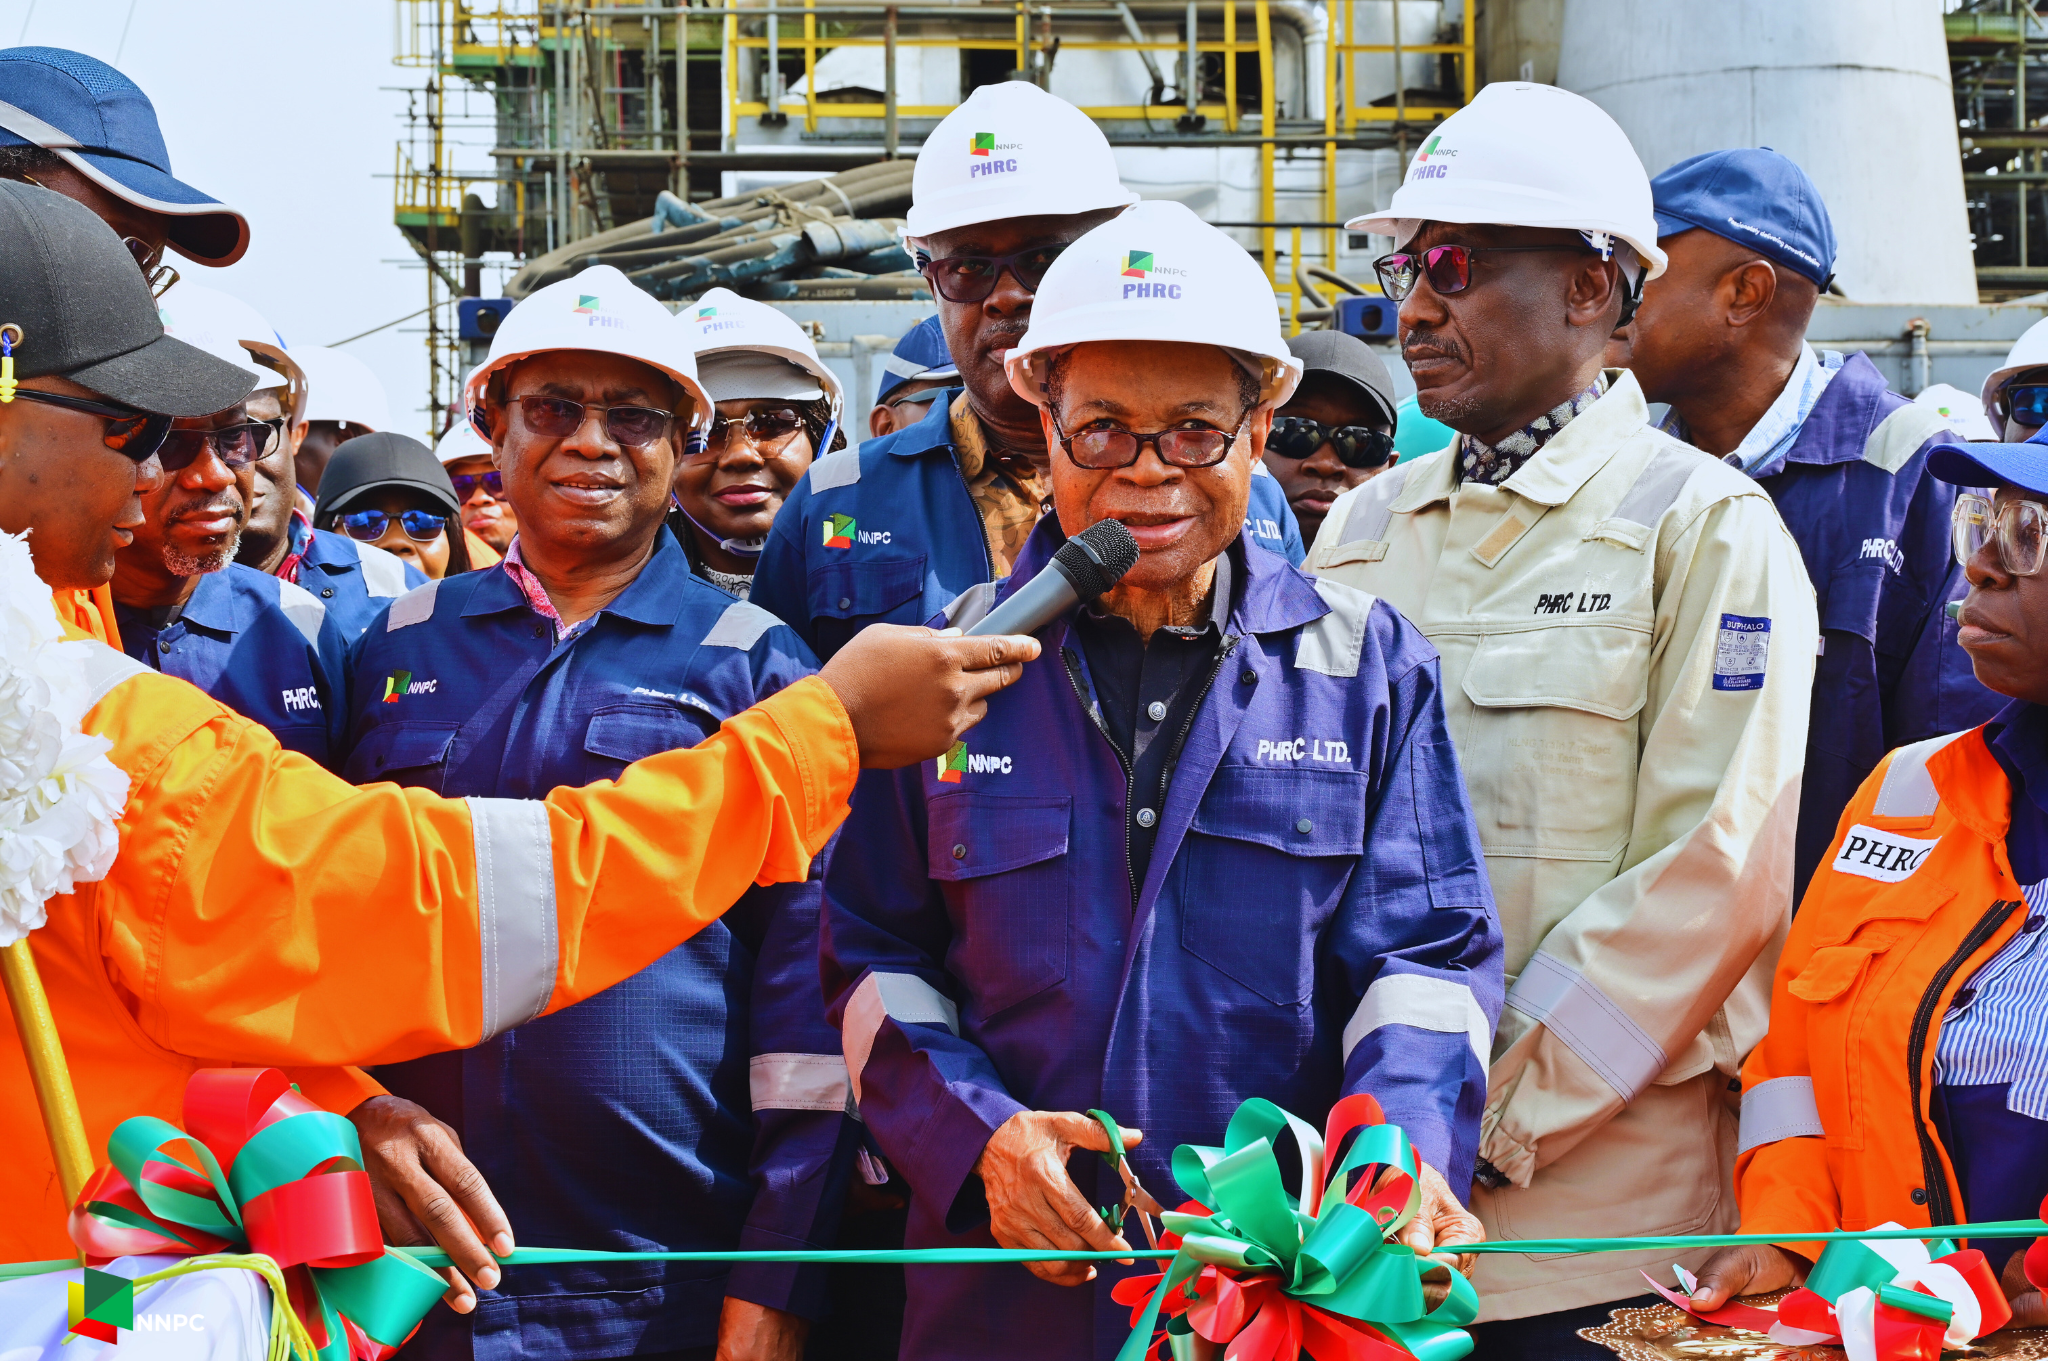 NNPC Ltd Fulfils Promise, Delivers Port Harcourt Refinery